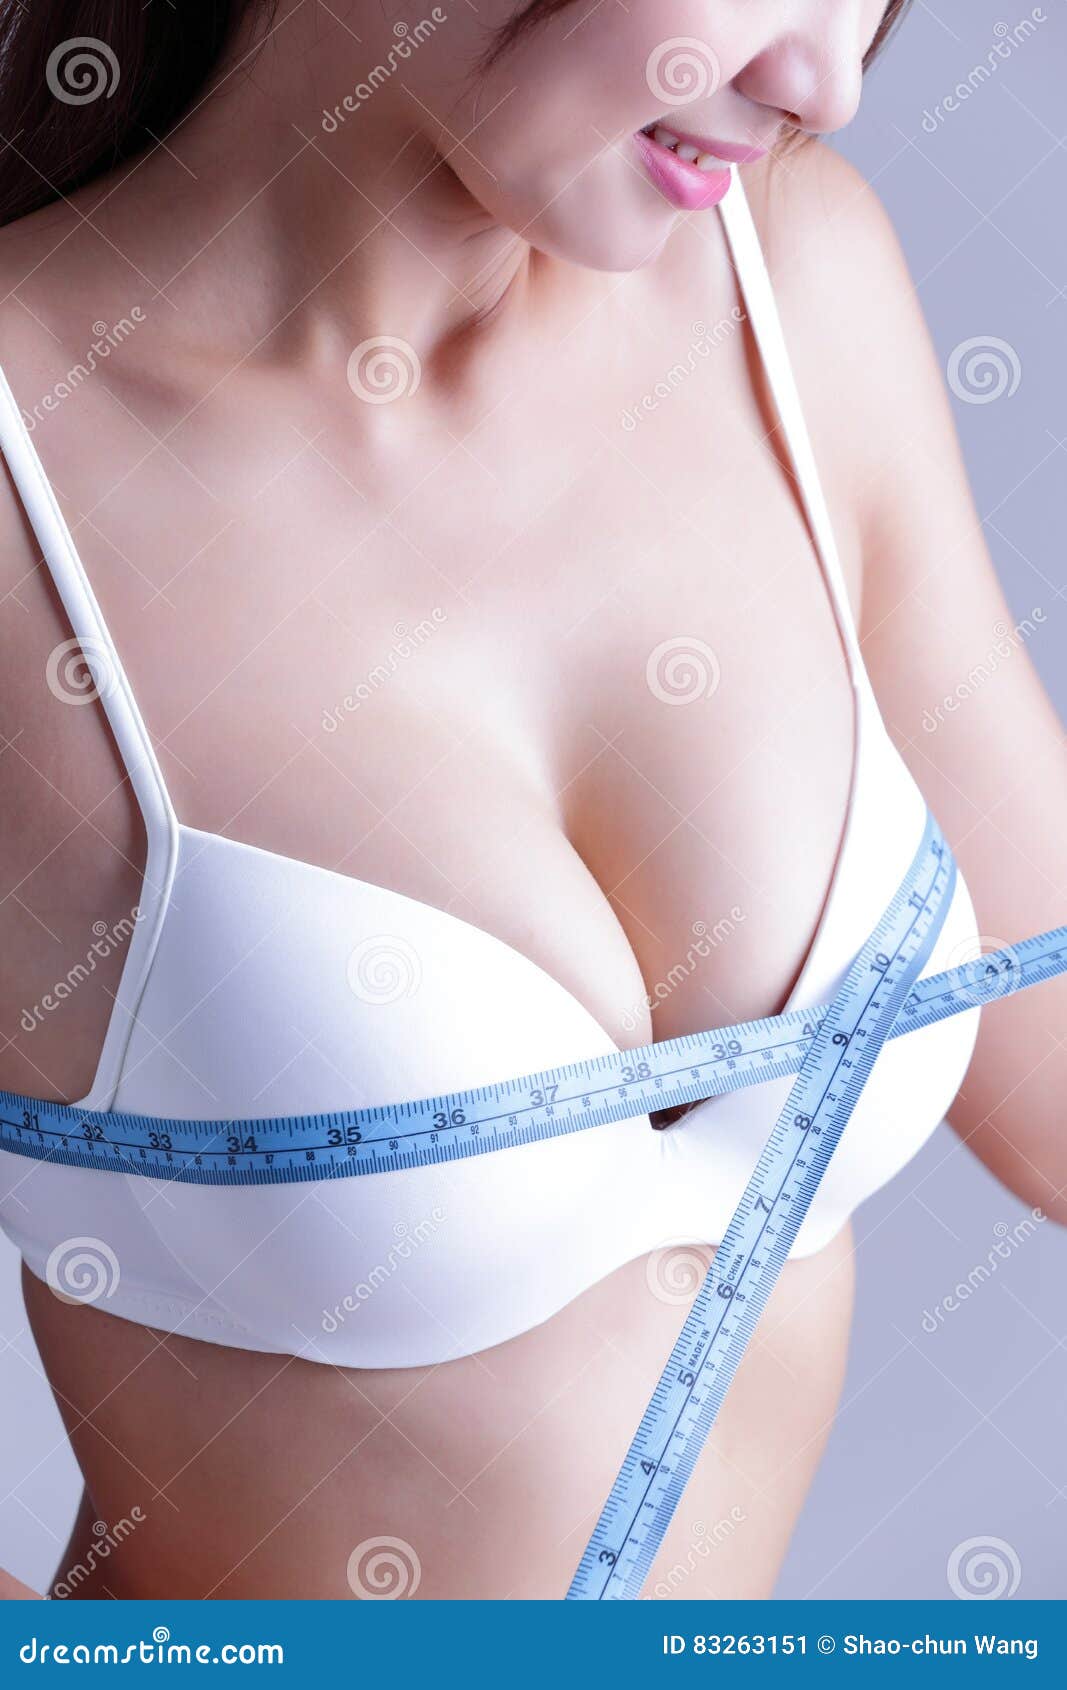 https://thumbs.dreamstime.com/z/young-woman-checking-breast-measurement-her-over-gray-background-asian-beauty-83263151.jpg